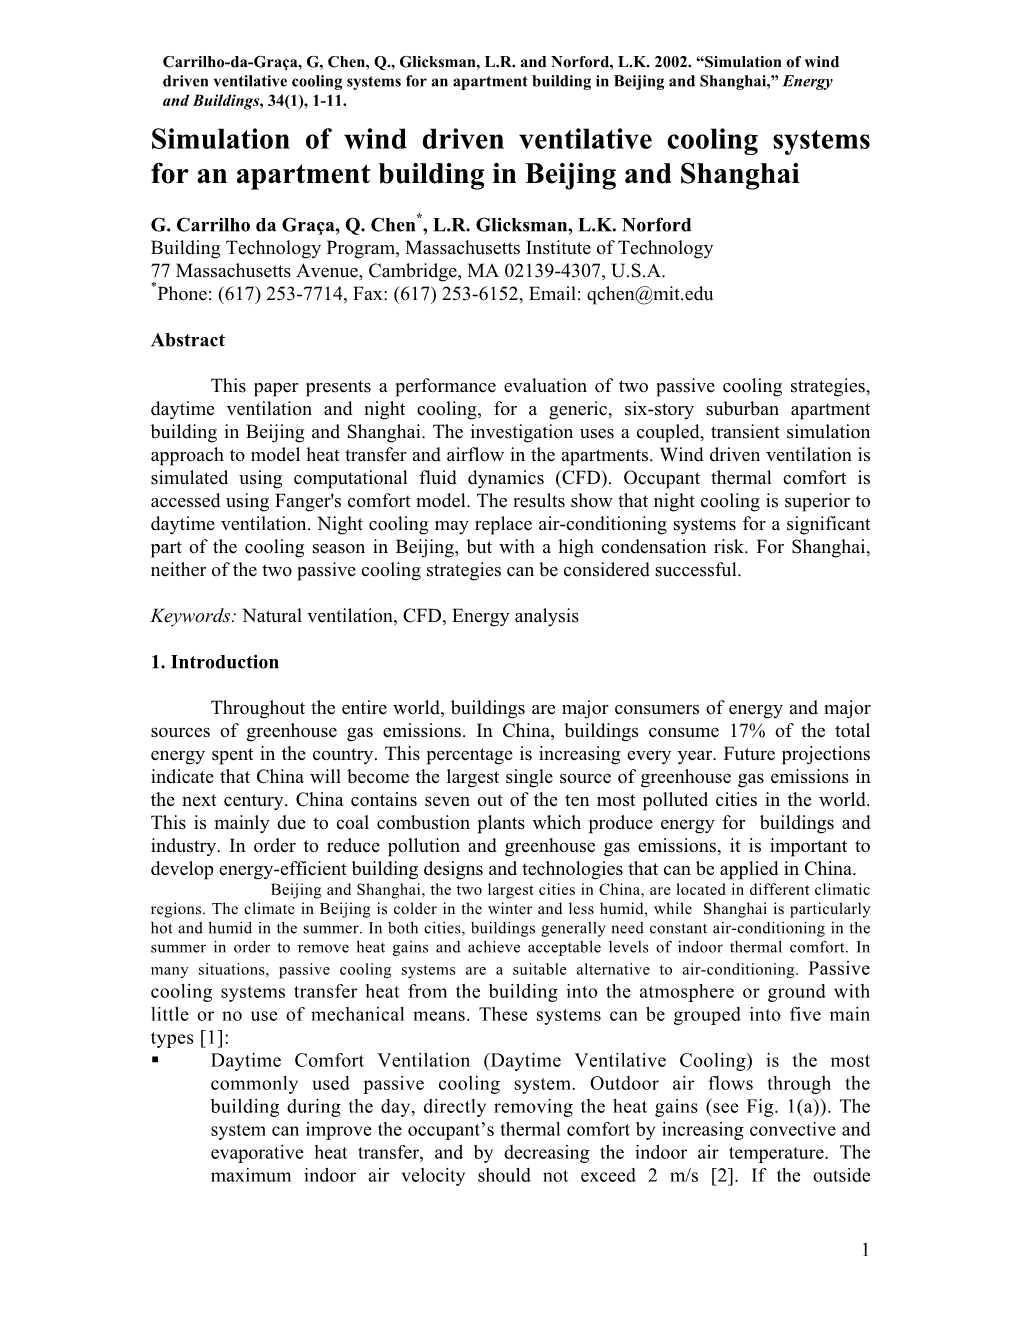 Simulation of Wind Driven Ventilative Cooling Systems for an Apartment Building in Beijing and Shanghai,” Energy and Buildings, 34(1), 1-11